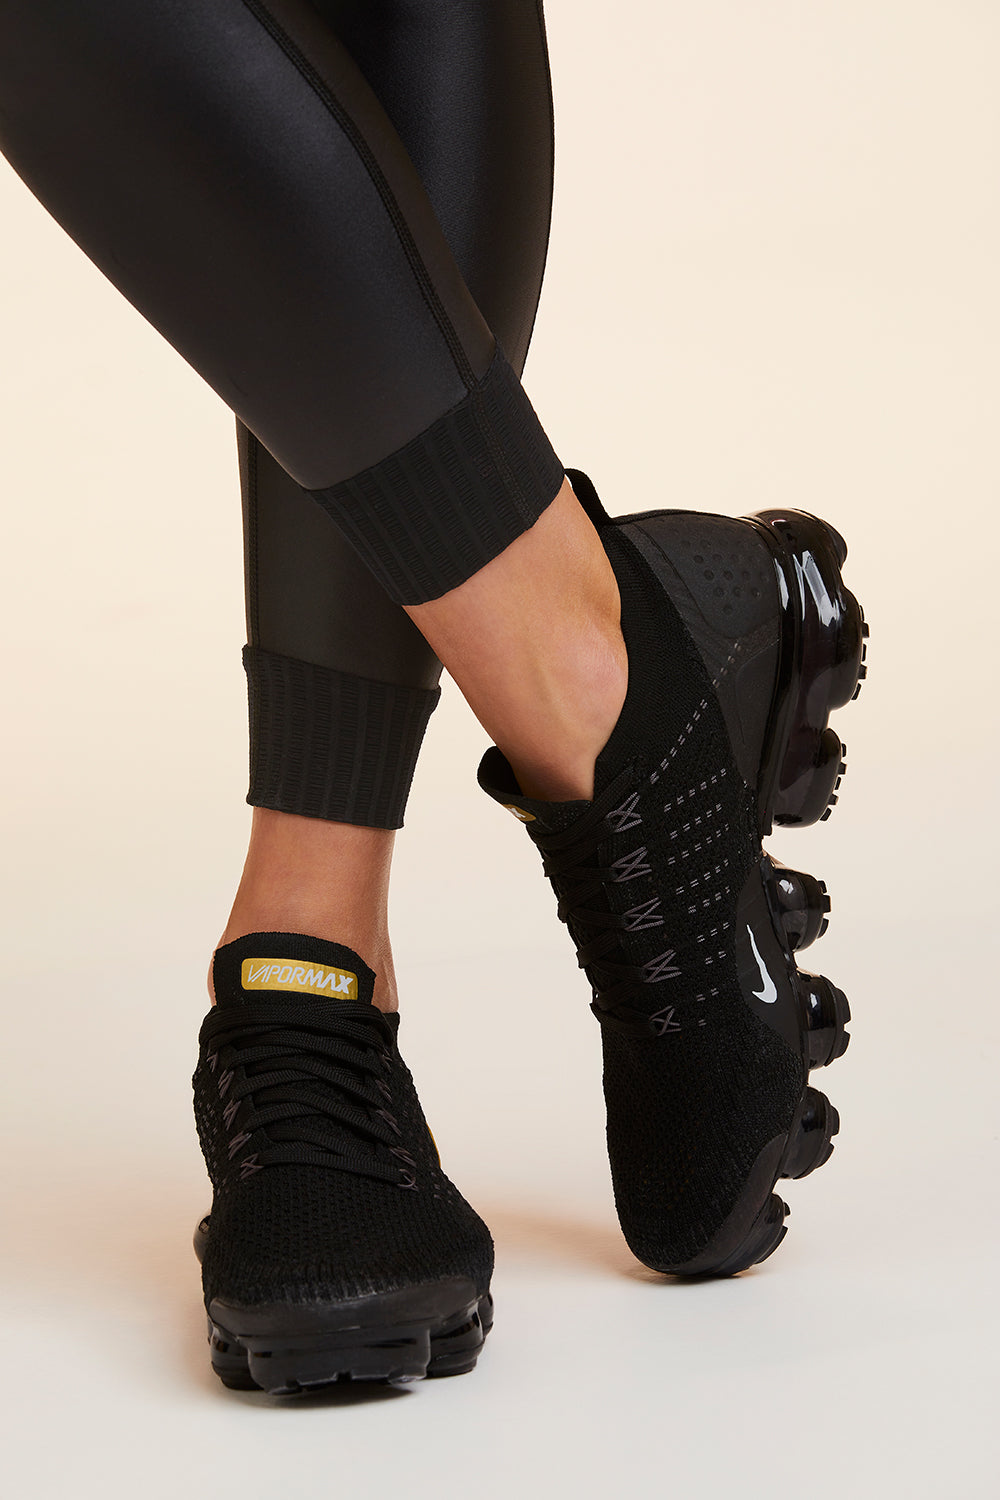 Close-up view of Alala Women's Luxury Athleisure shiny black tight with sheer ribbed detail